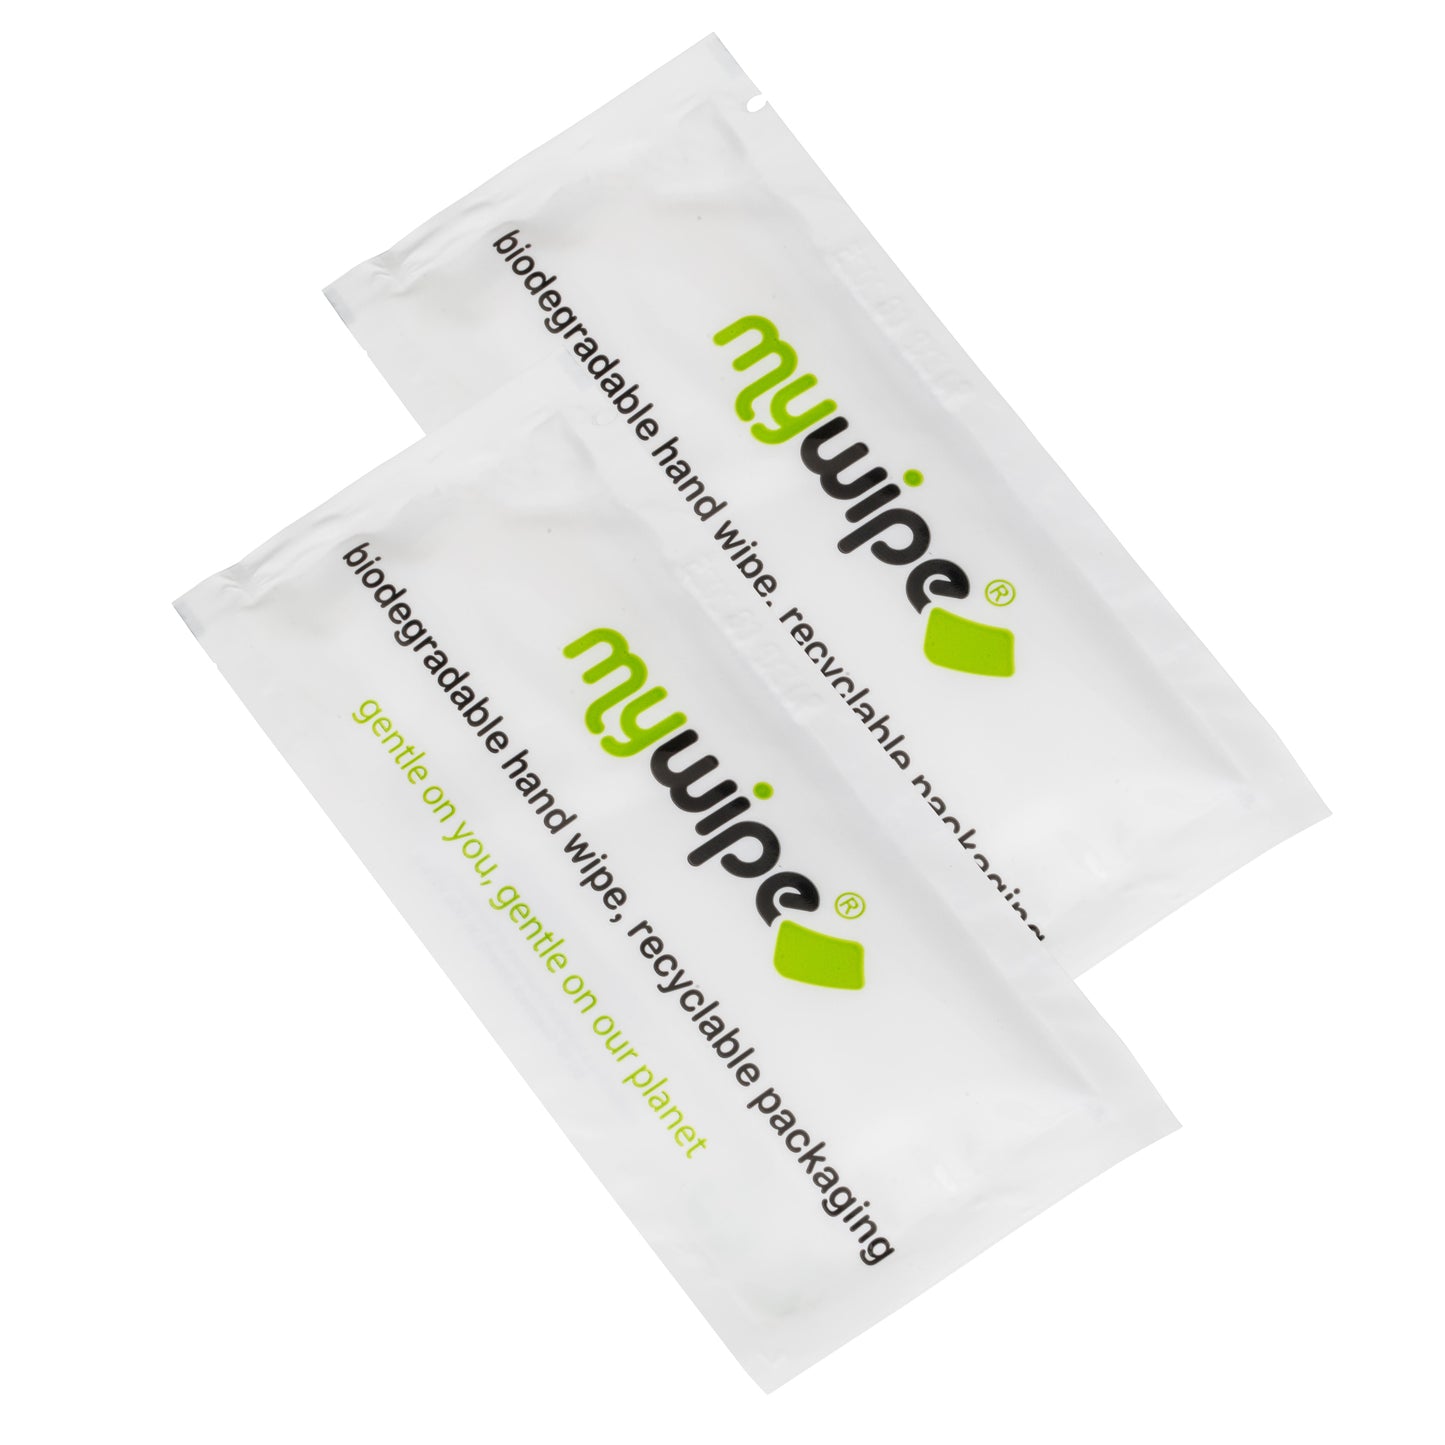 BIODEGRADABLE HAND WIPE IN RECYCLABLE SACHETS - CASE OF 500